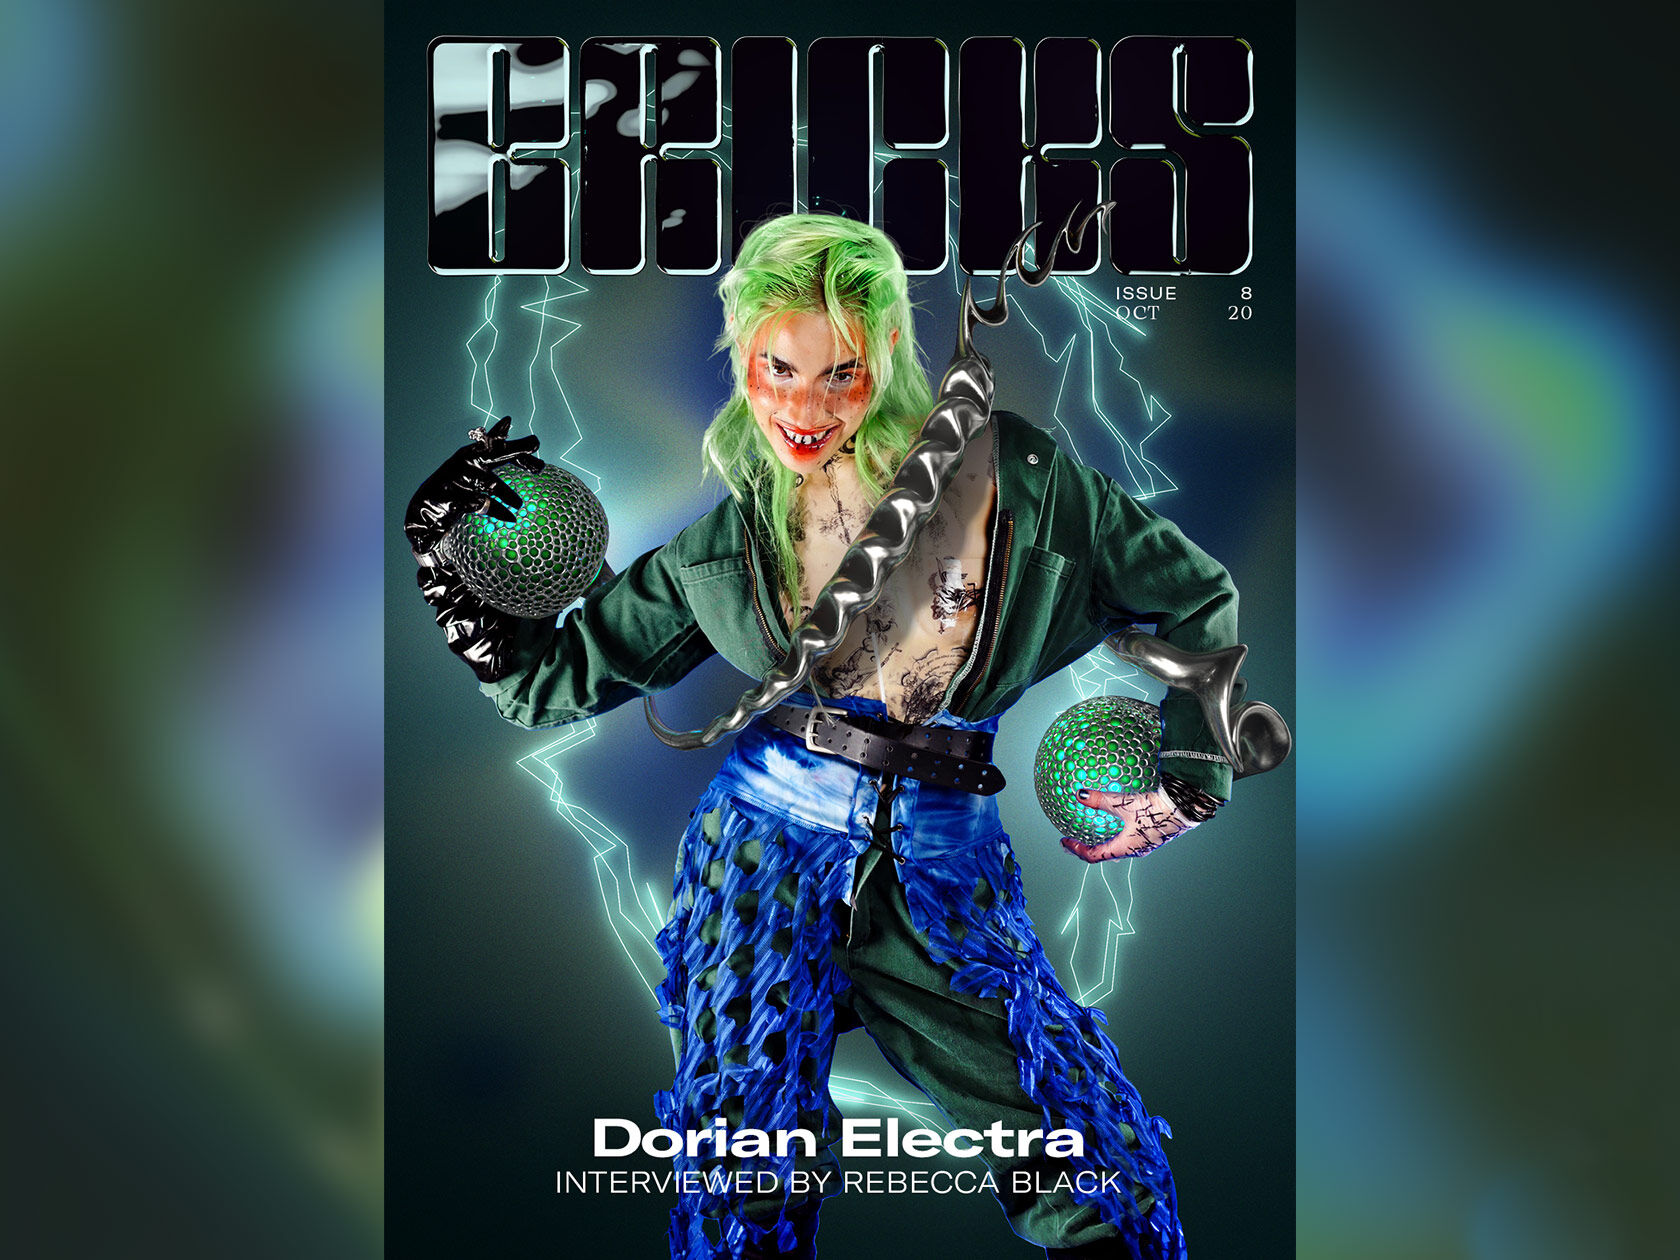 Nina Doll and Steffen Bewer talk us through the process of creating the otherworldly cover story with Dorian Electra for Bricks Magazine